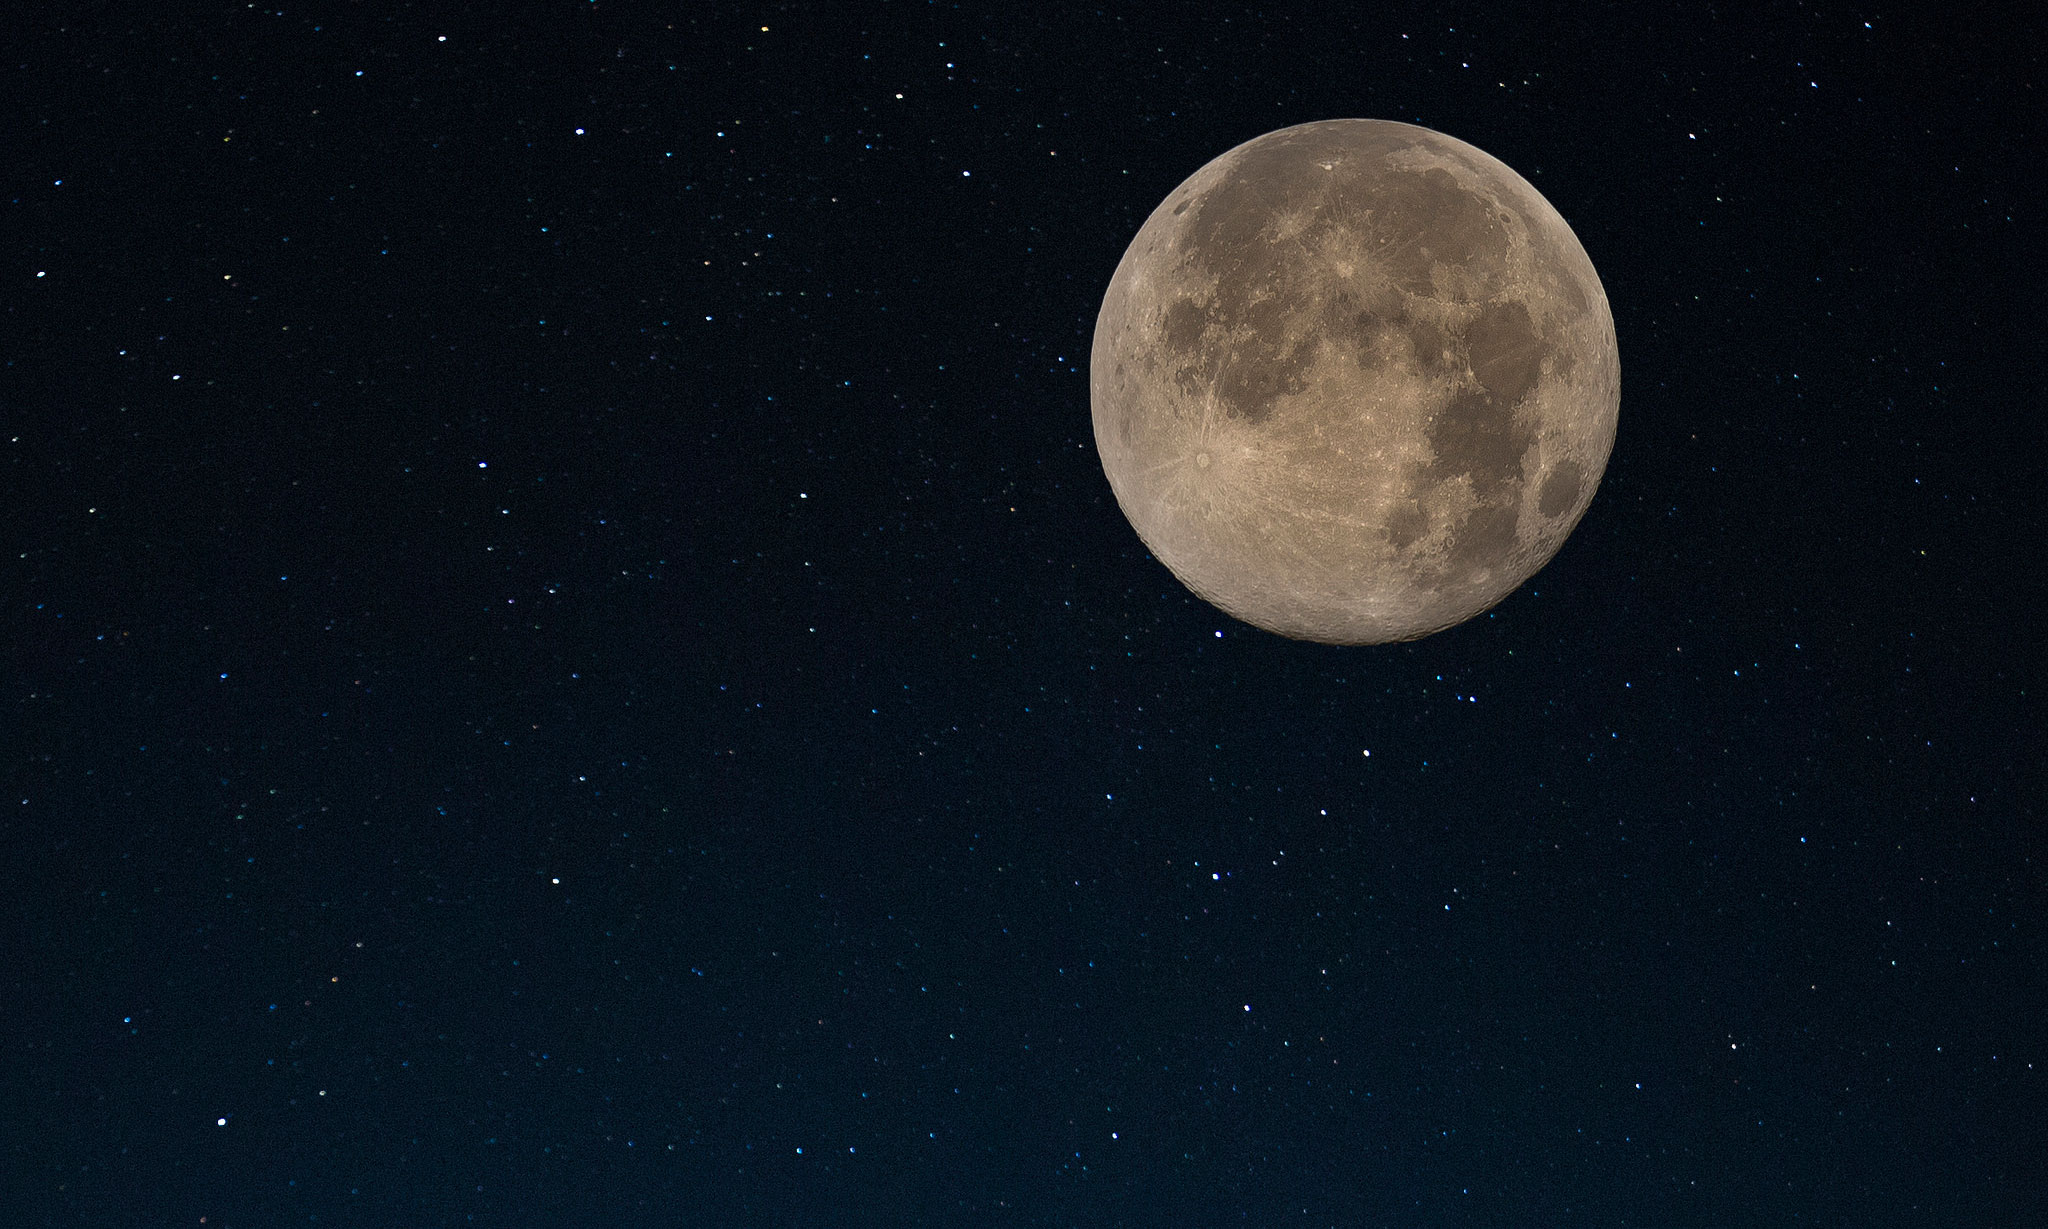 Super Moon photo via davejdoe from Creative Commons license on Flickr.